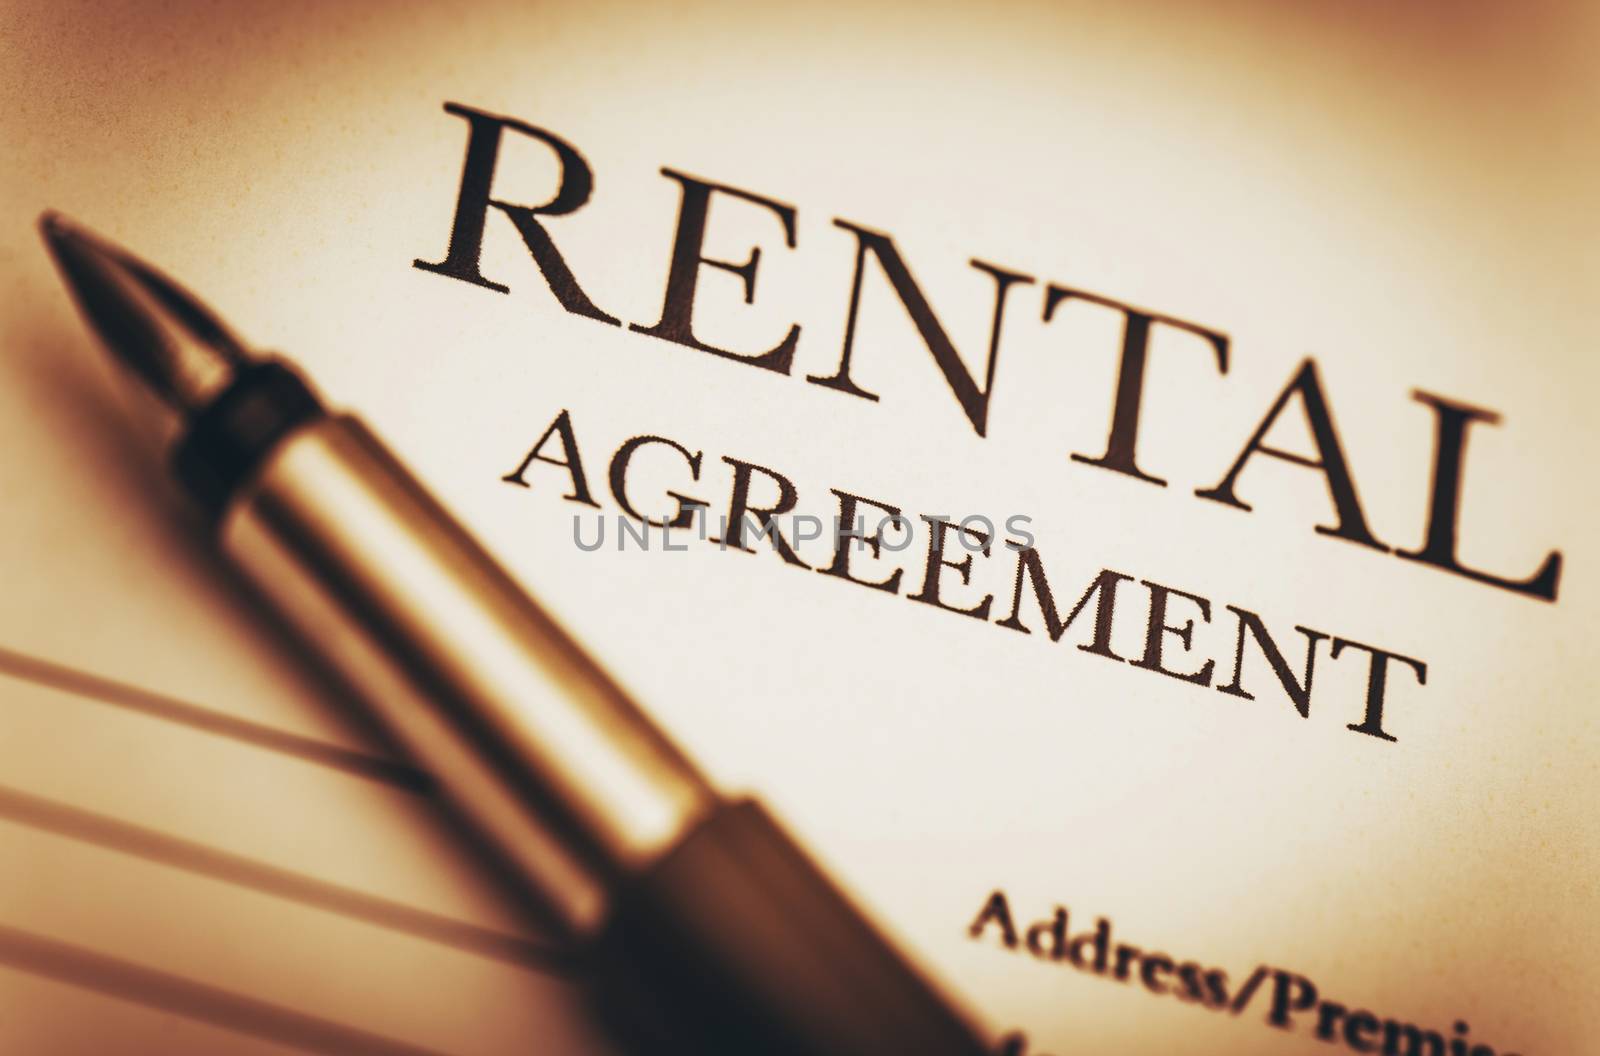 Rental Agreement by welcomia